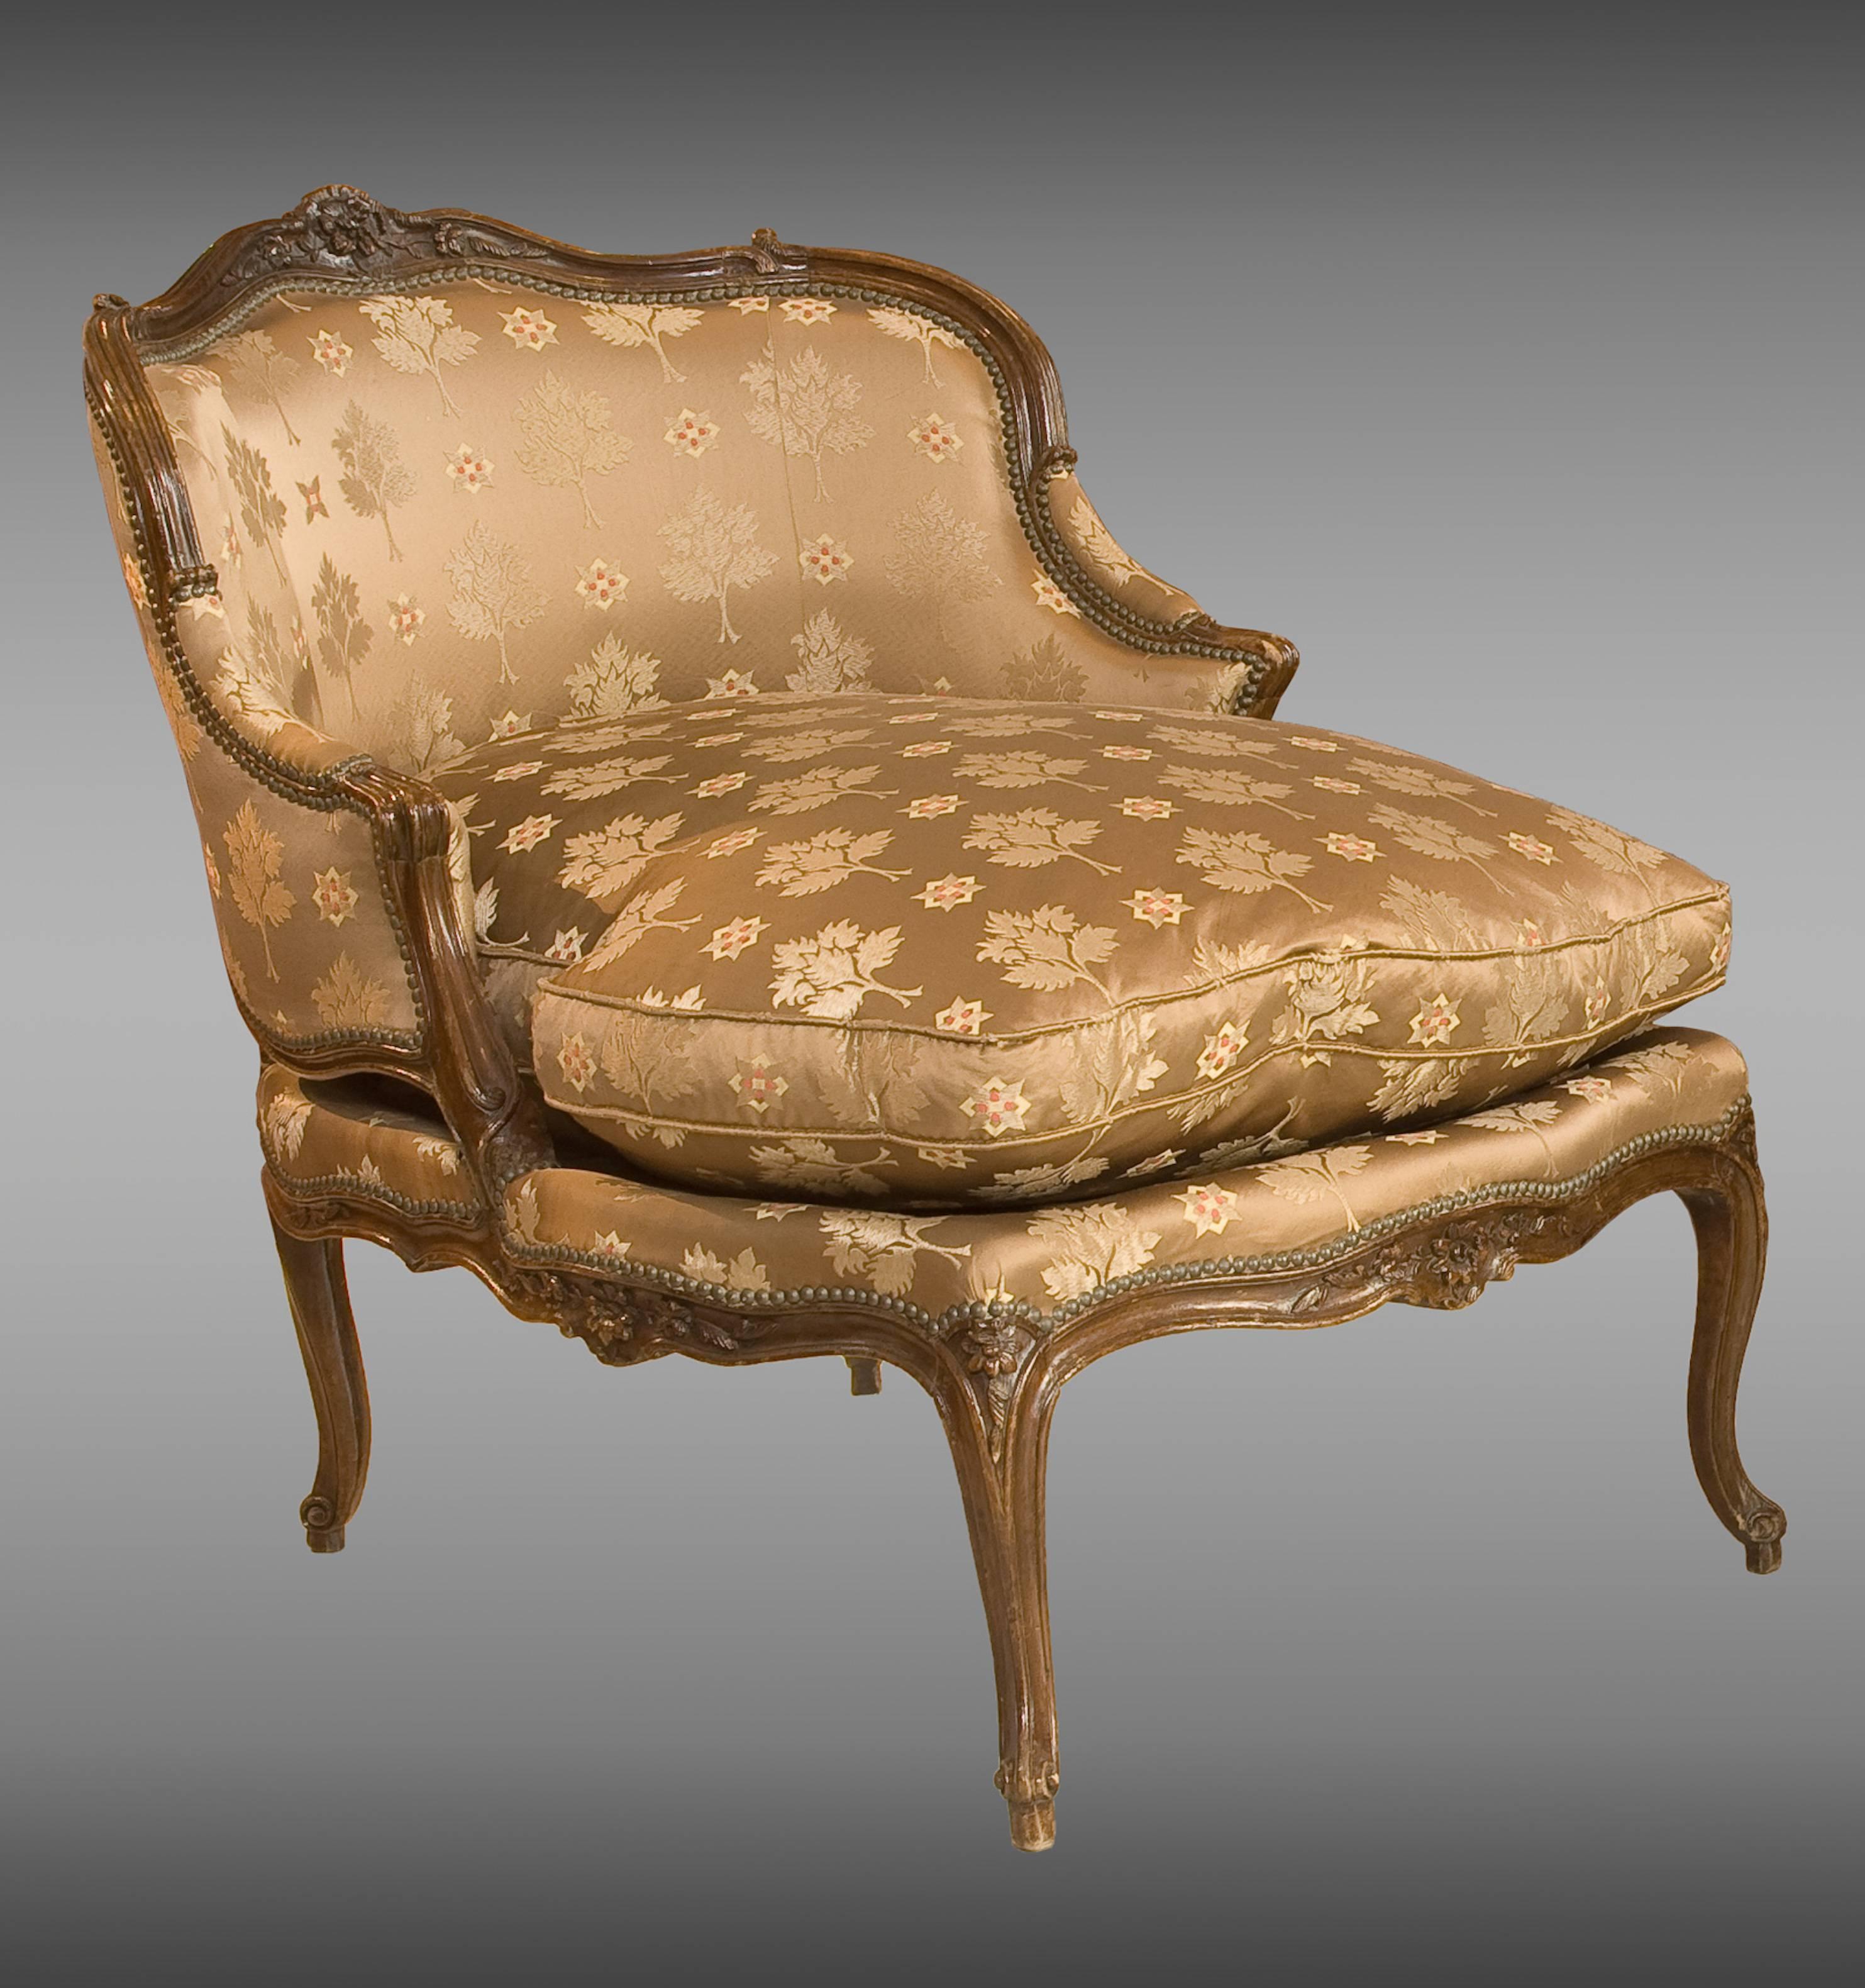 Carved walnut, with floral decorations and cabriole legs.
French, Louis XV

Measures: Heigth 97/74 cm.
Seat height 50 cm.
Width 83/73 cm.
Length 109/90 cm.